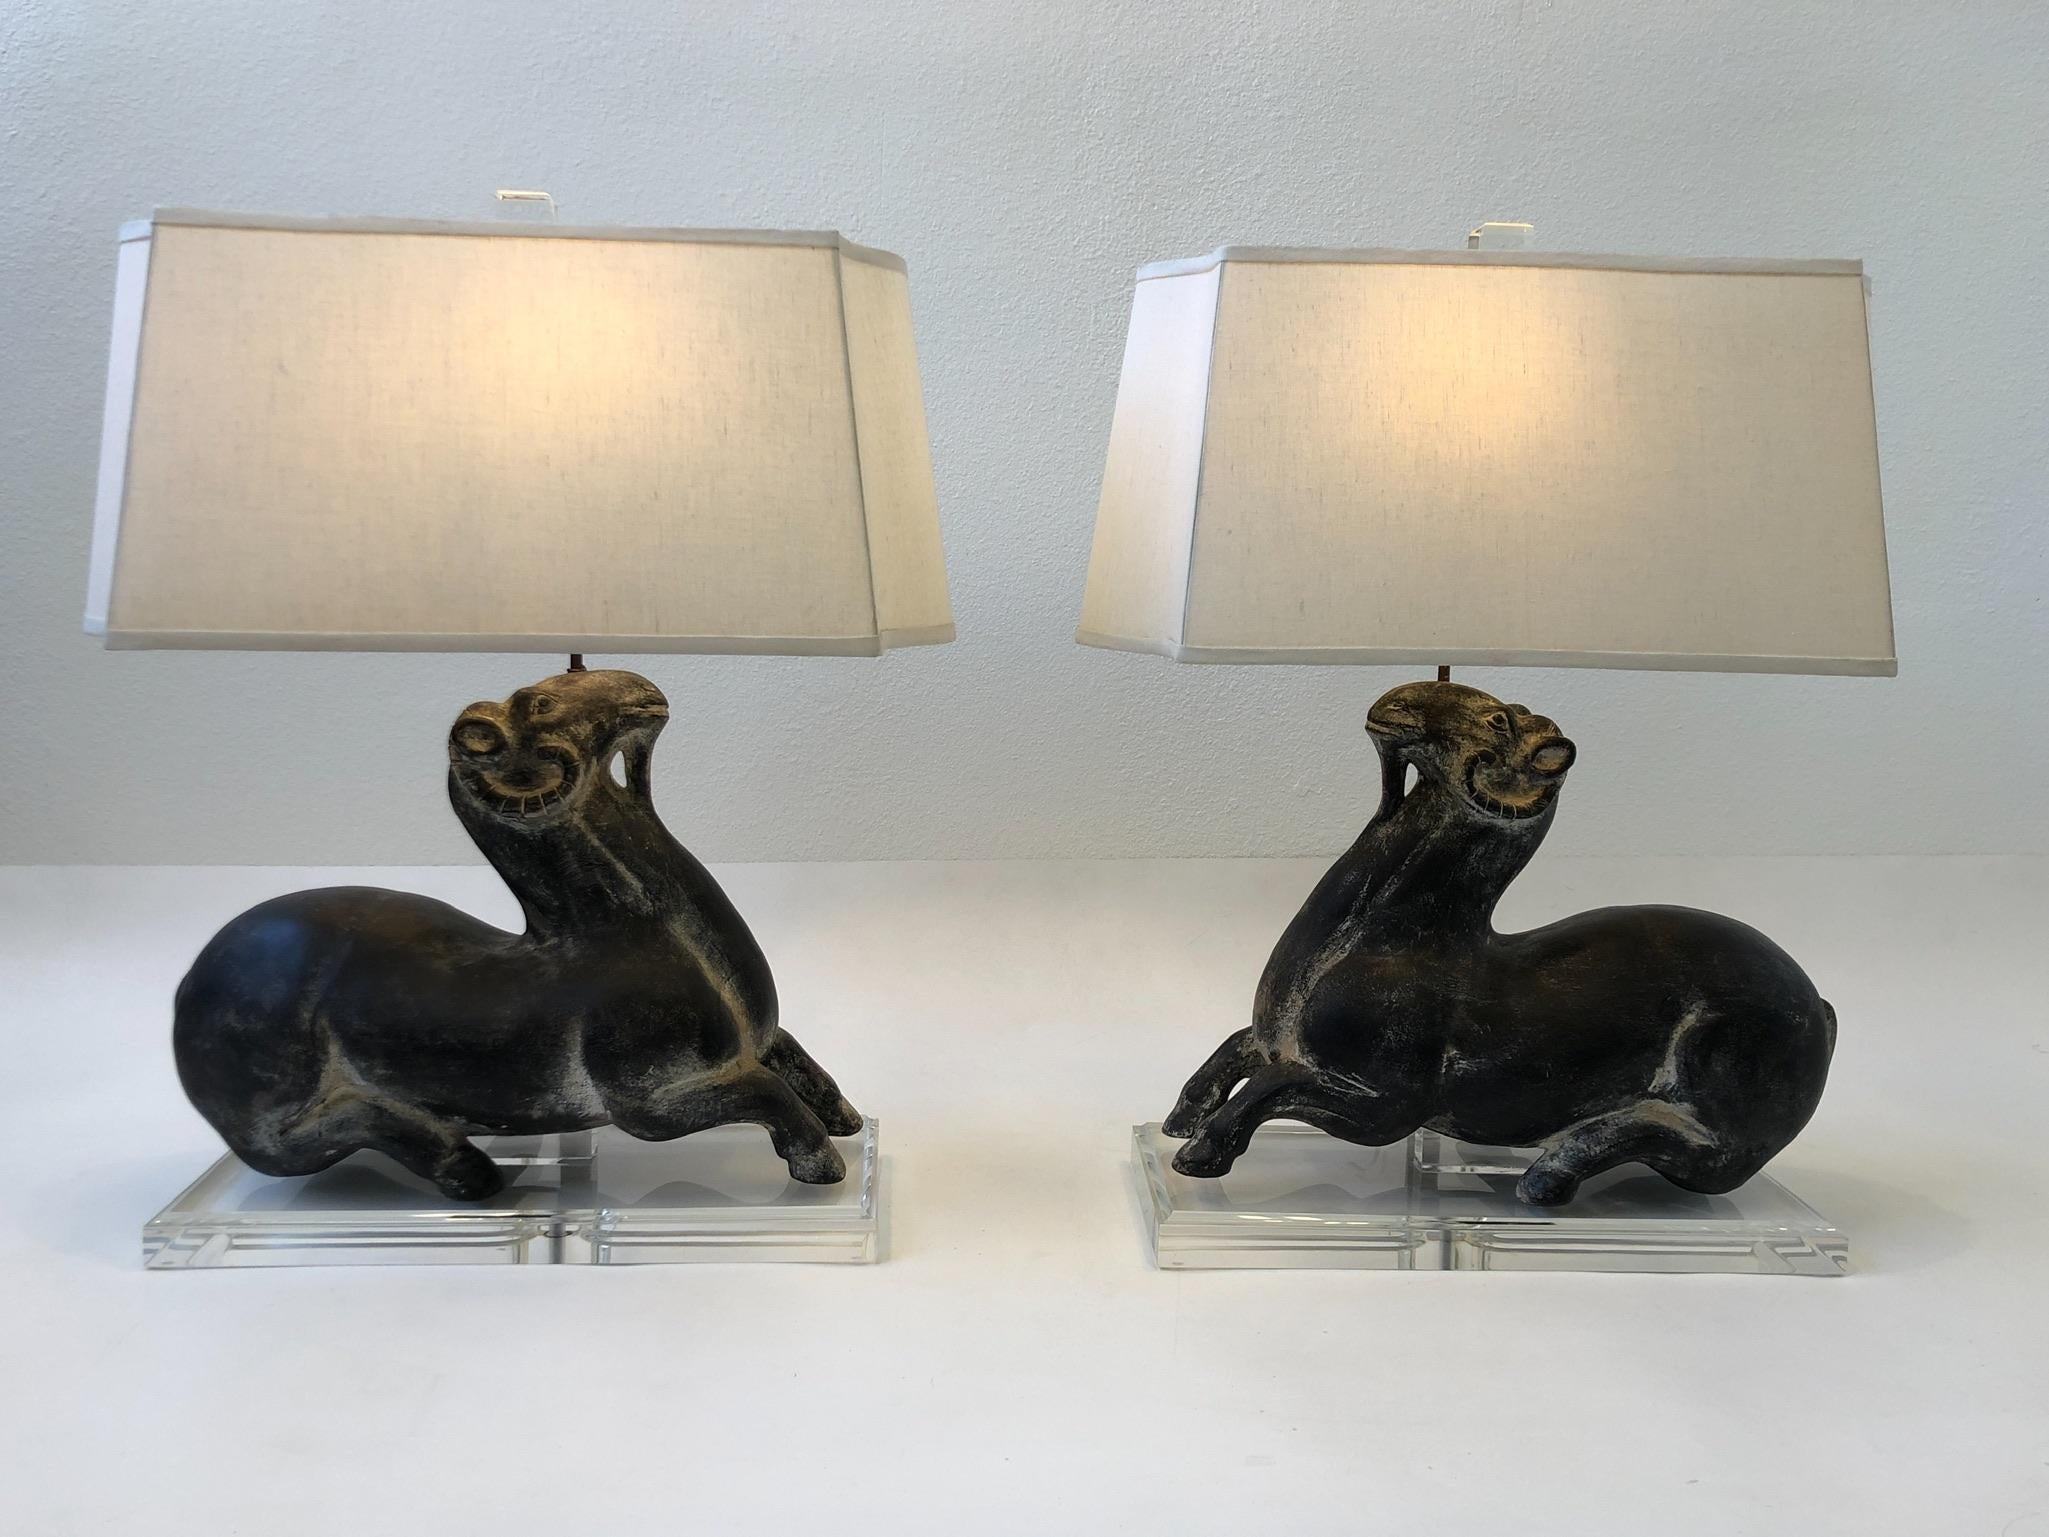 Pair of Ceramic Goats and Lucite Table Lamps by Steve Chase For Sale 3